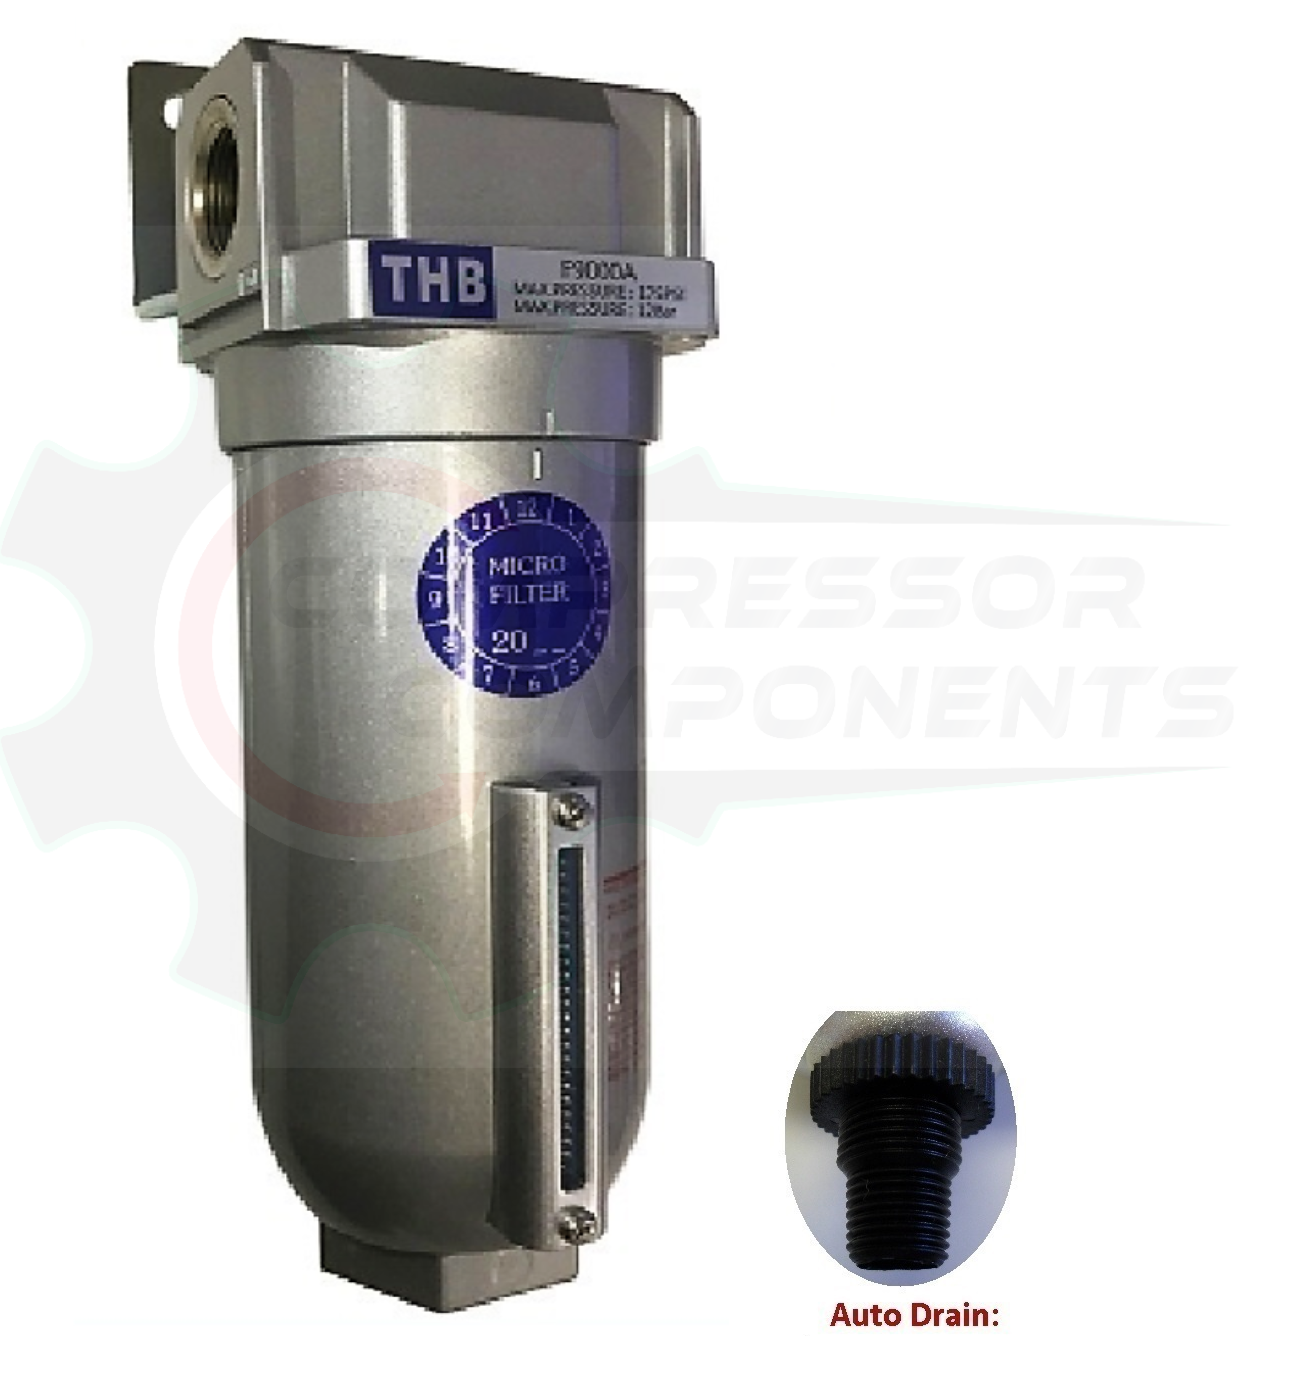 THB F908A INDUSTRIAL PARTICULATE FILTER -  1" FNPT HIGH FLOW INDUSTRIAL GRADE WITH 5 MICRON 160 CFM FILTER & AUTO DRAIN